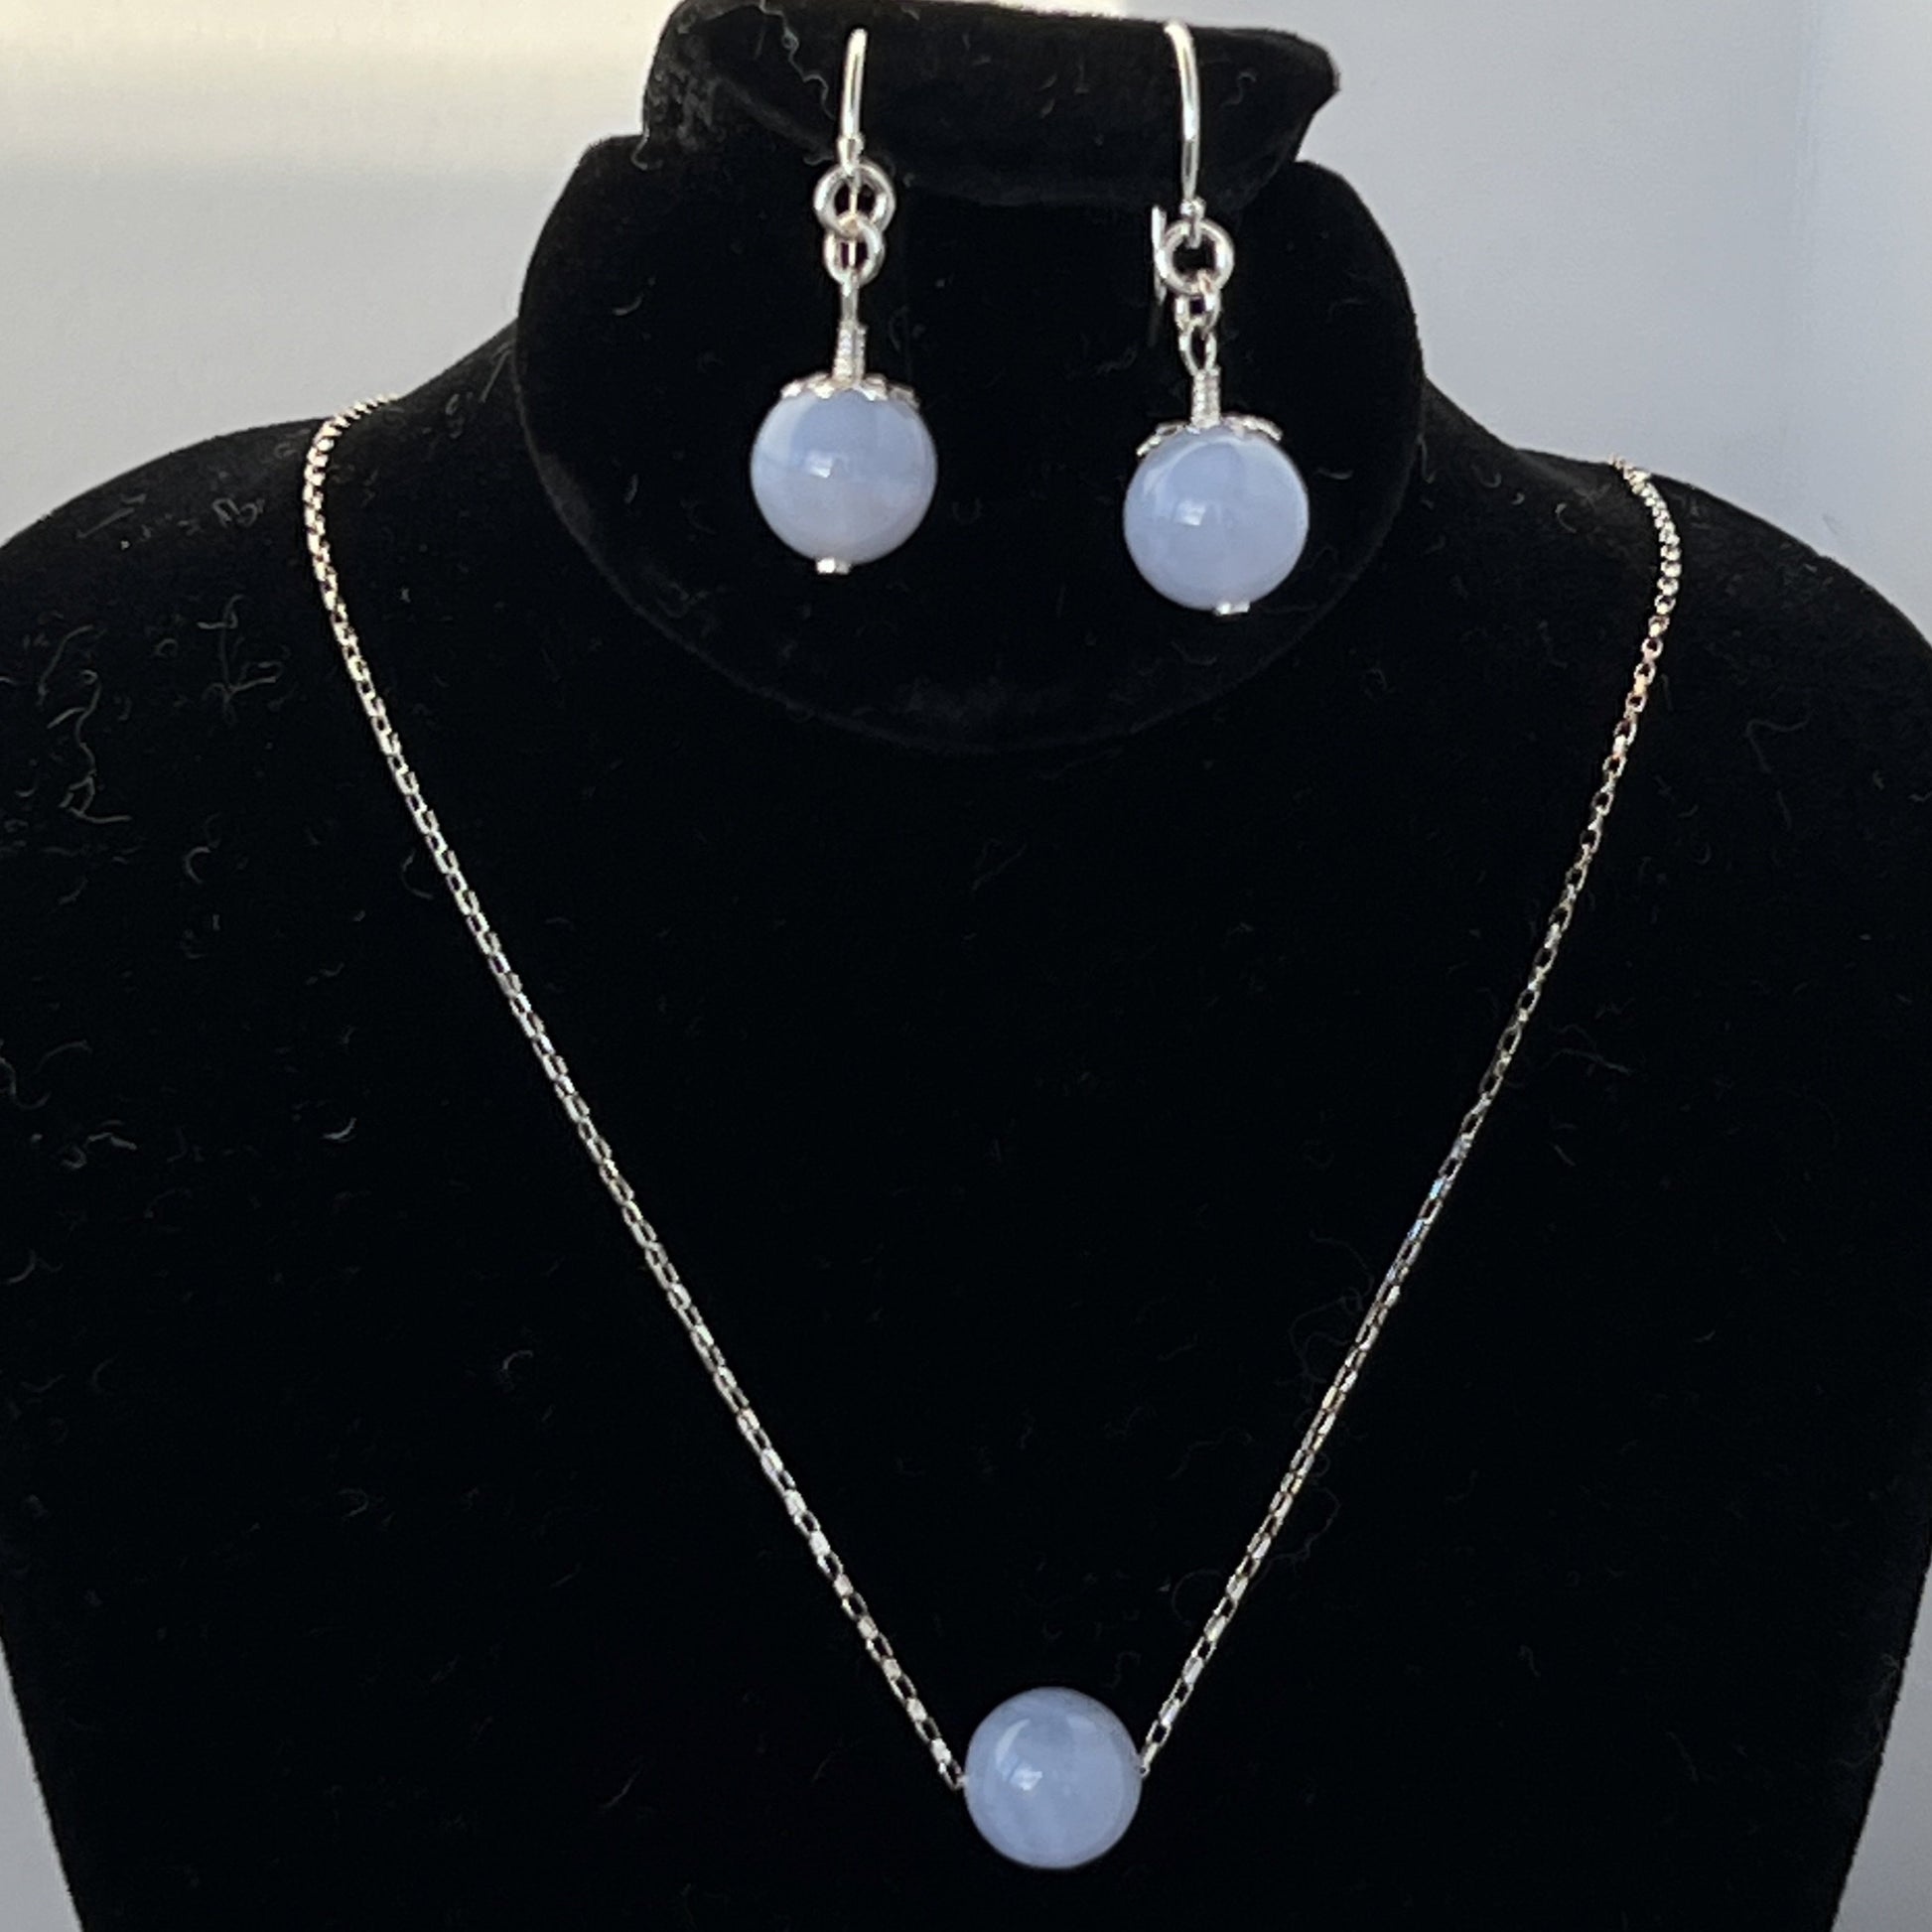 10mm Blue Lace Agate bead earrings and pendant with magnet clasp